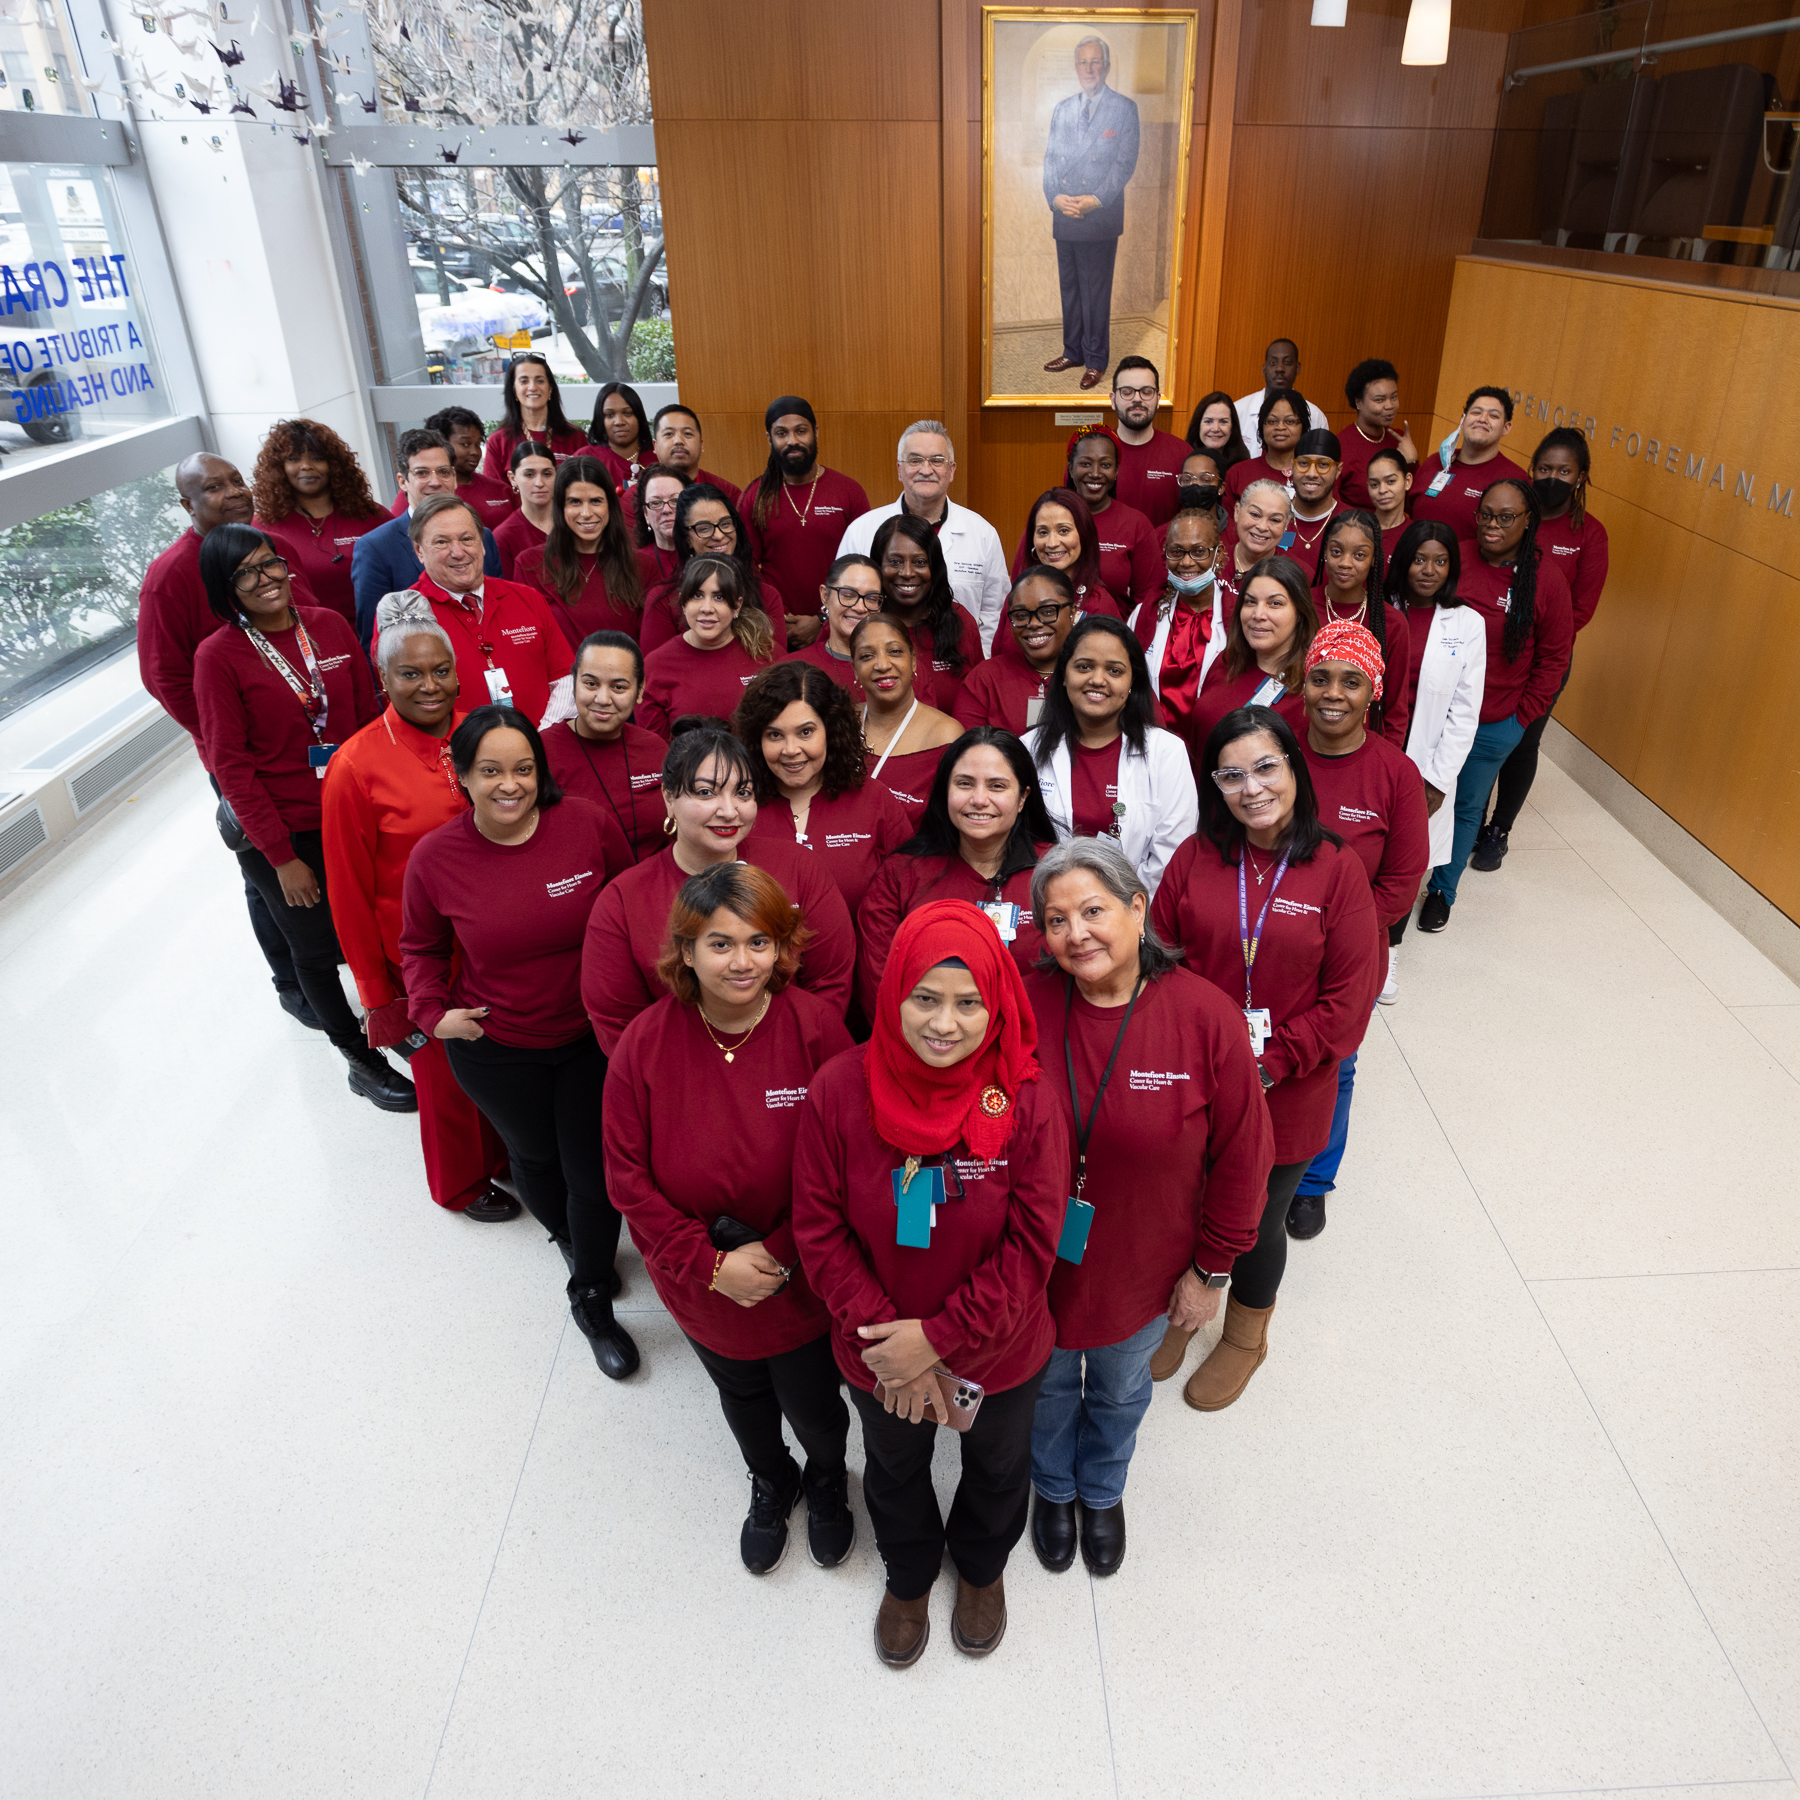 Health care professionals celebrate heart health awareness at Montefiore. -Photo by Montefiore